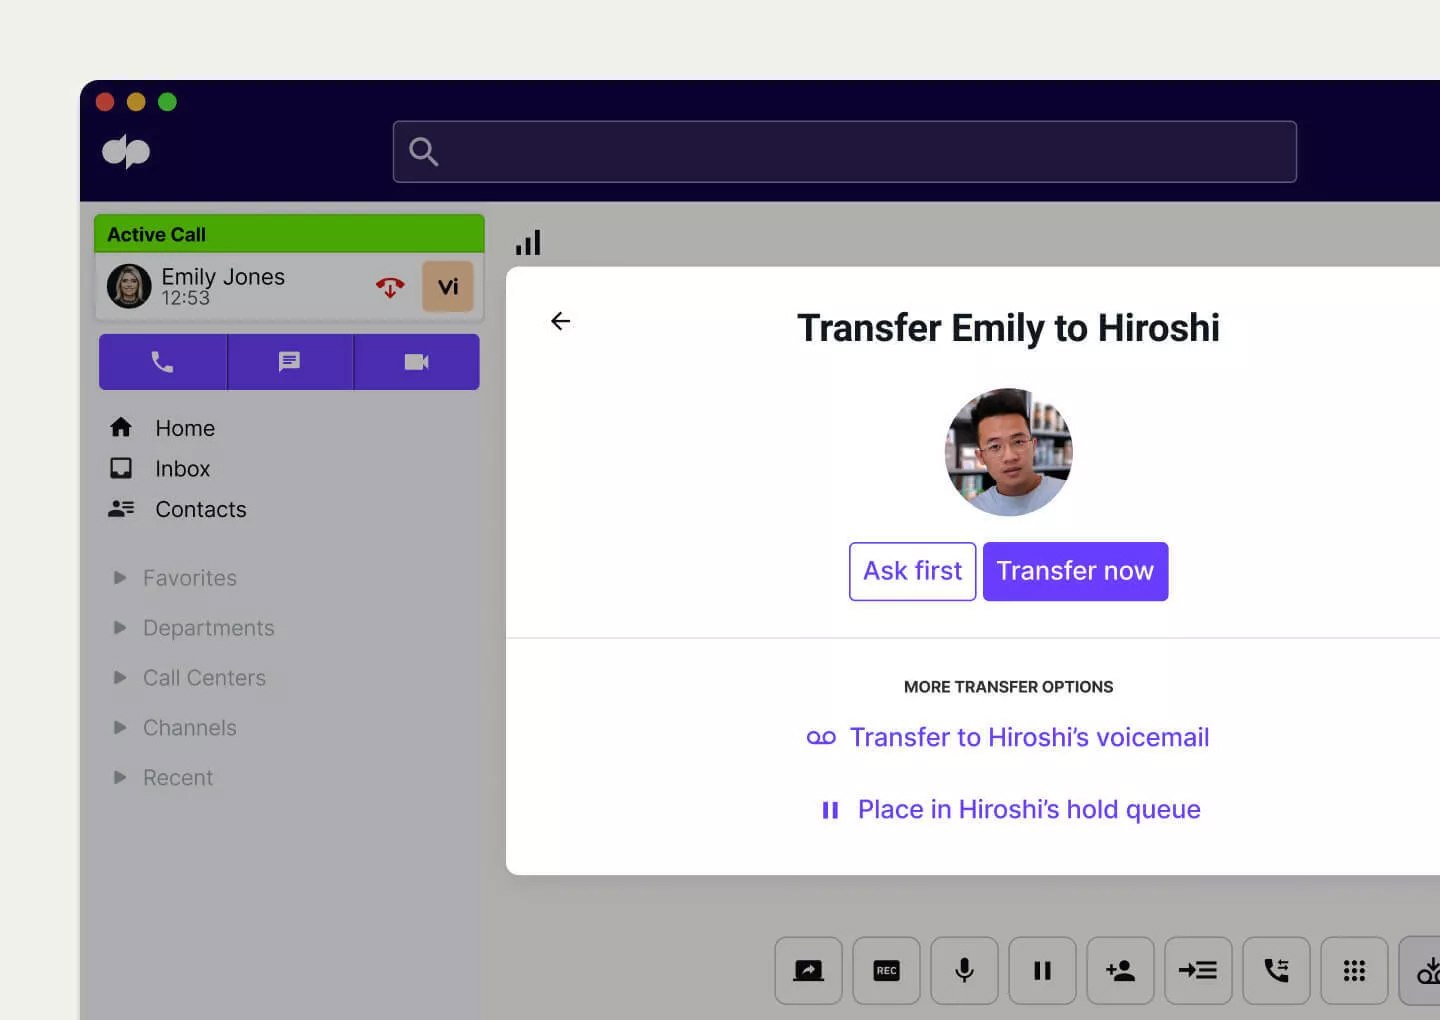 A Dialpad dialog box for call transfer showing the "Ask first" and "Transfer now" buttons, and other transfer options.